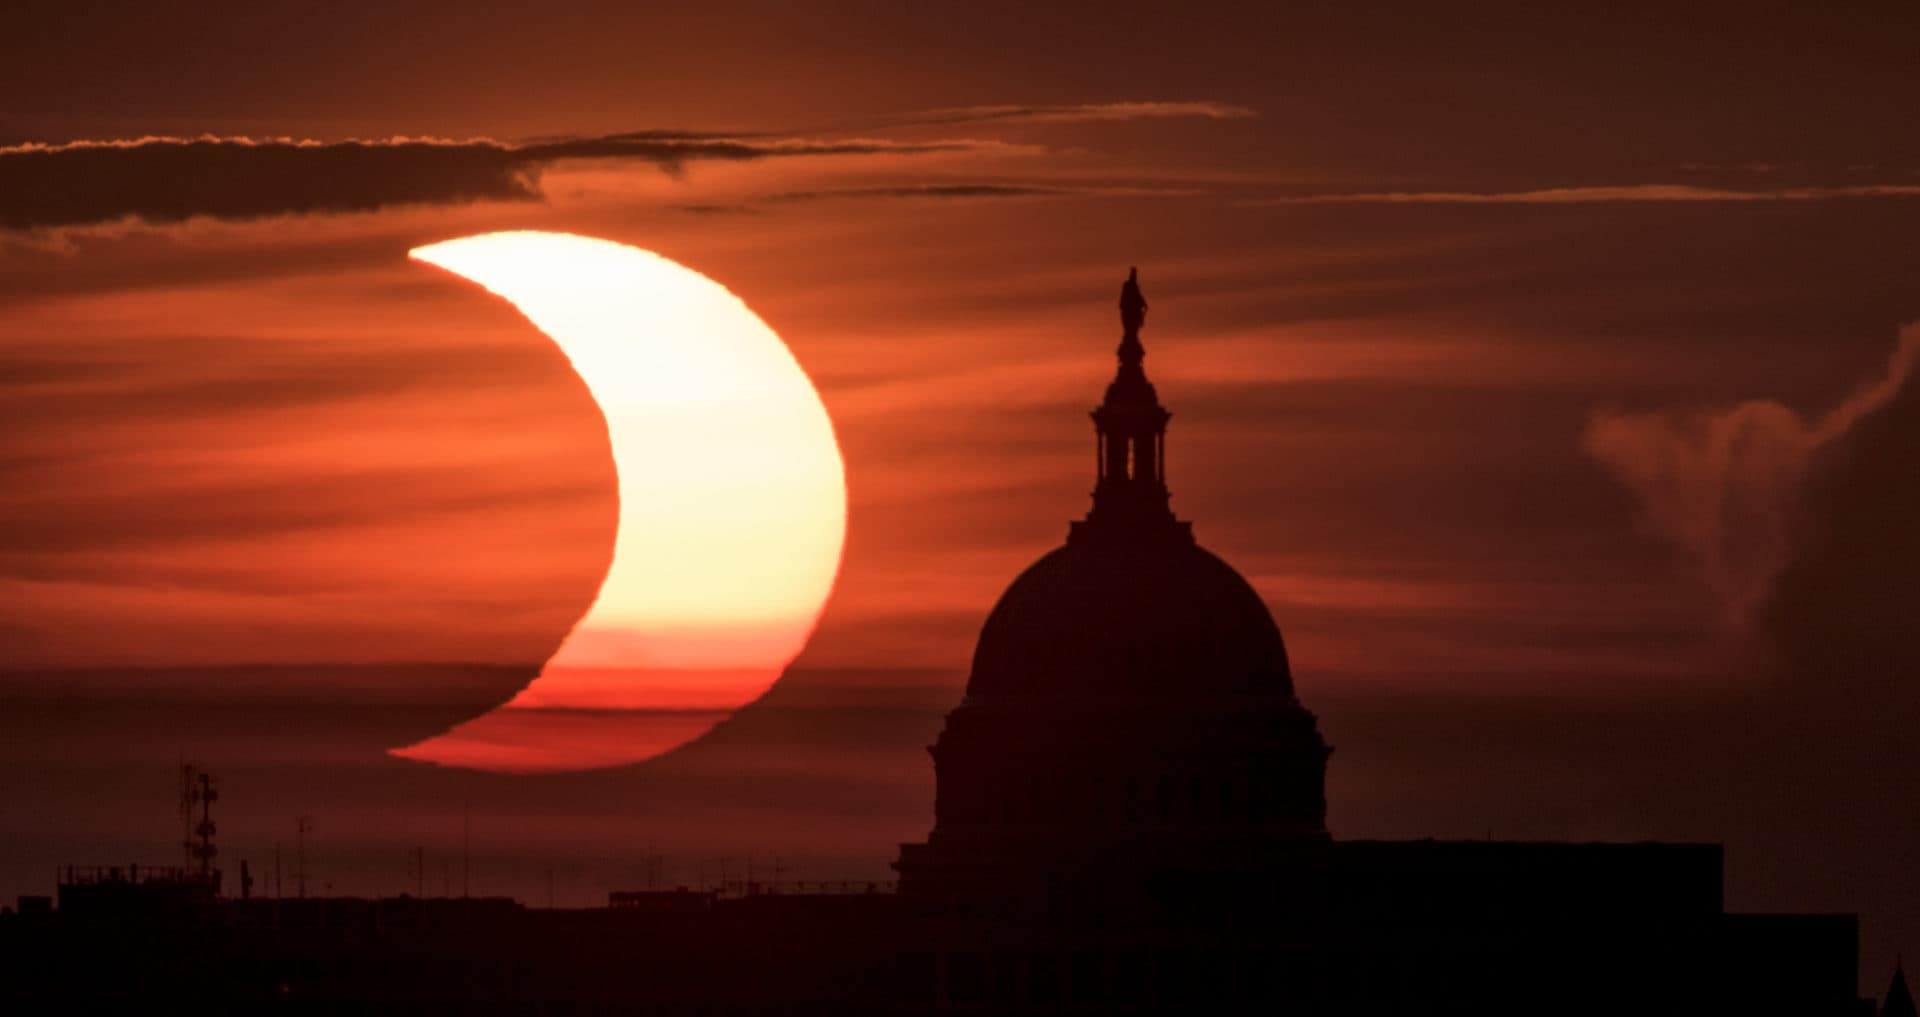 A partial solar eclipse is seen as the sun rises behind the Capitol Building on June 10, 2021 in Arlington, Virginia. (Bill Ingalls/NASA via Getty Images)